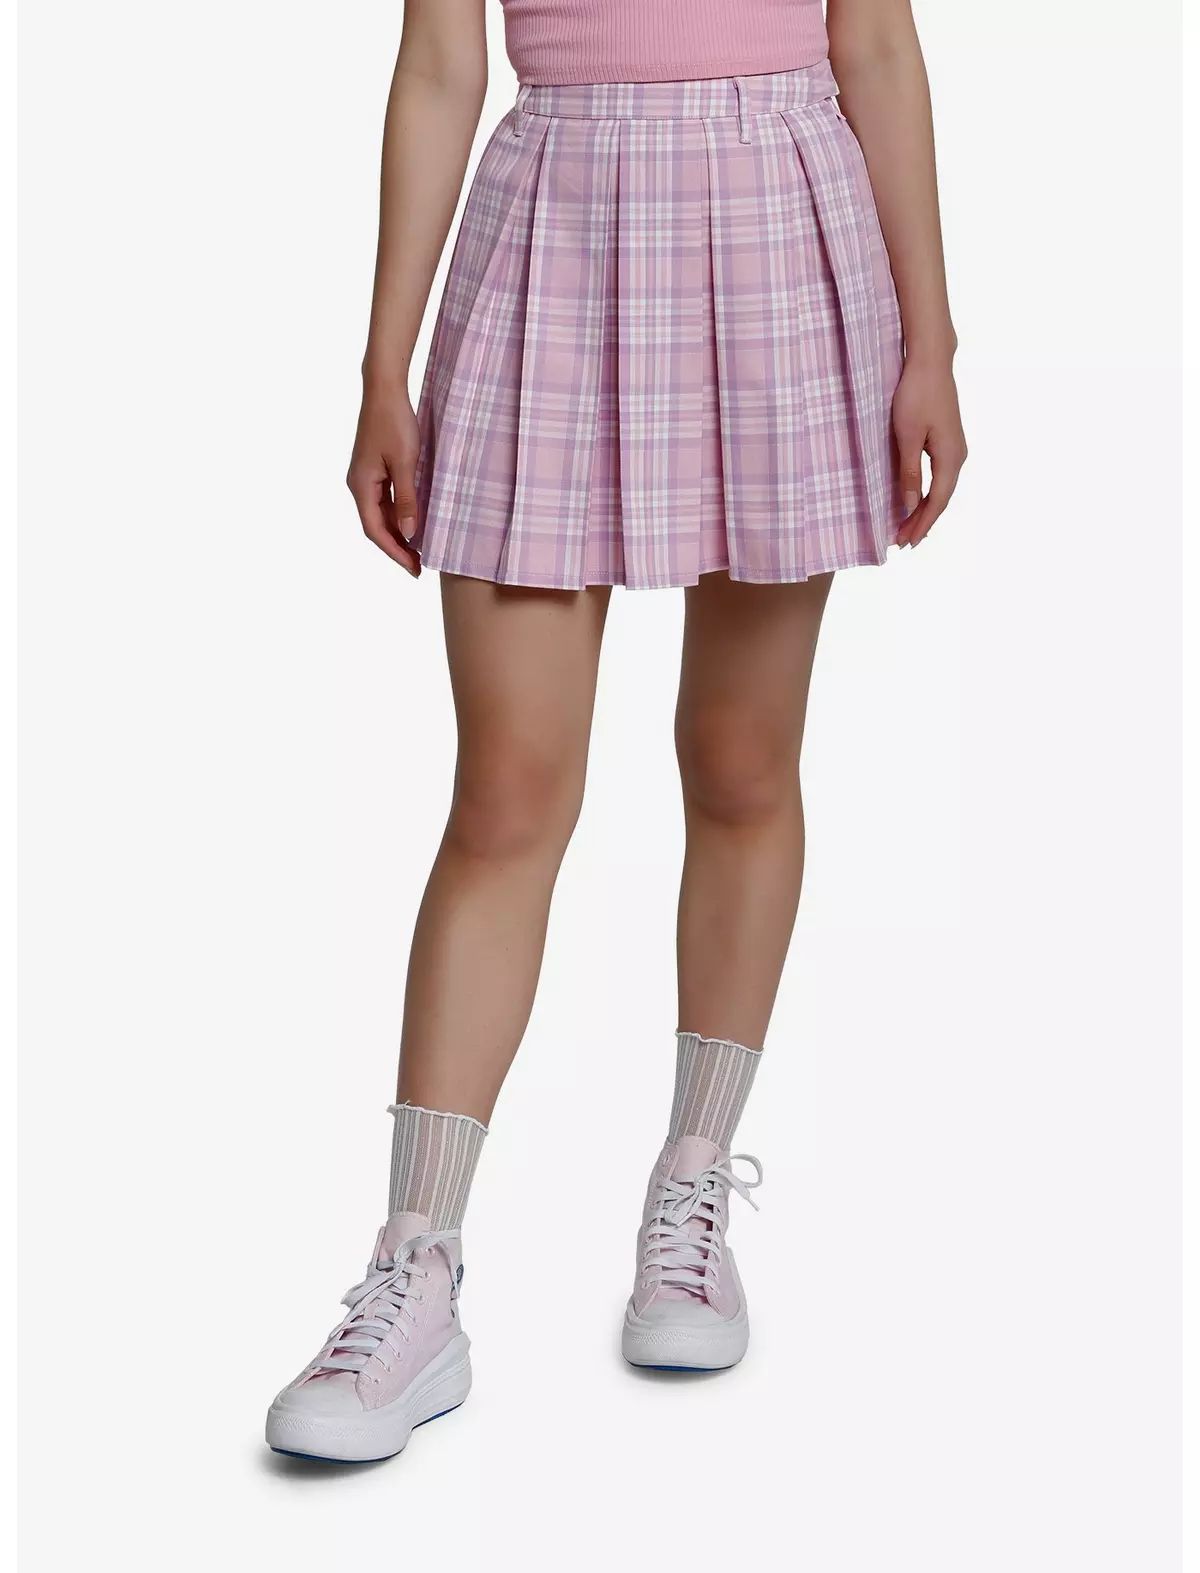 Sweet Society Pink & Lavender Plaid Pleated Skirt | Hot Topic